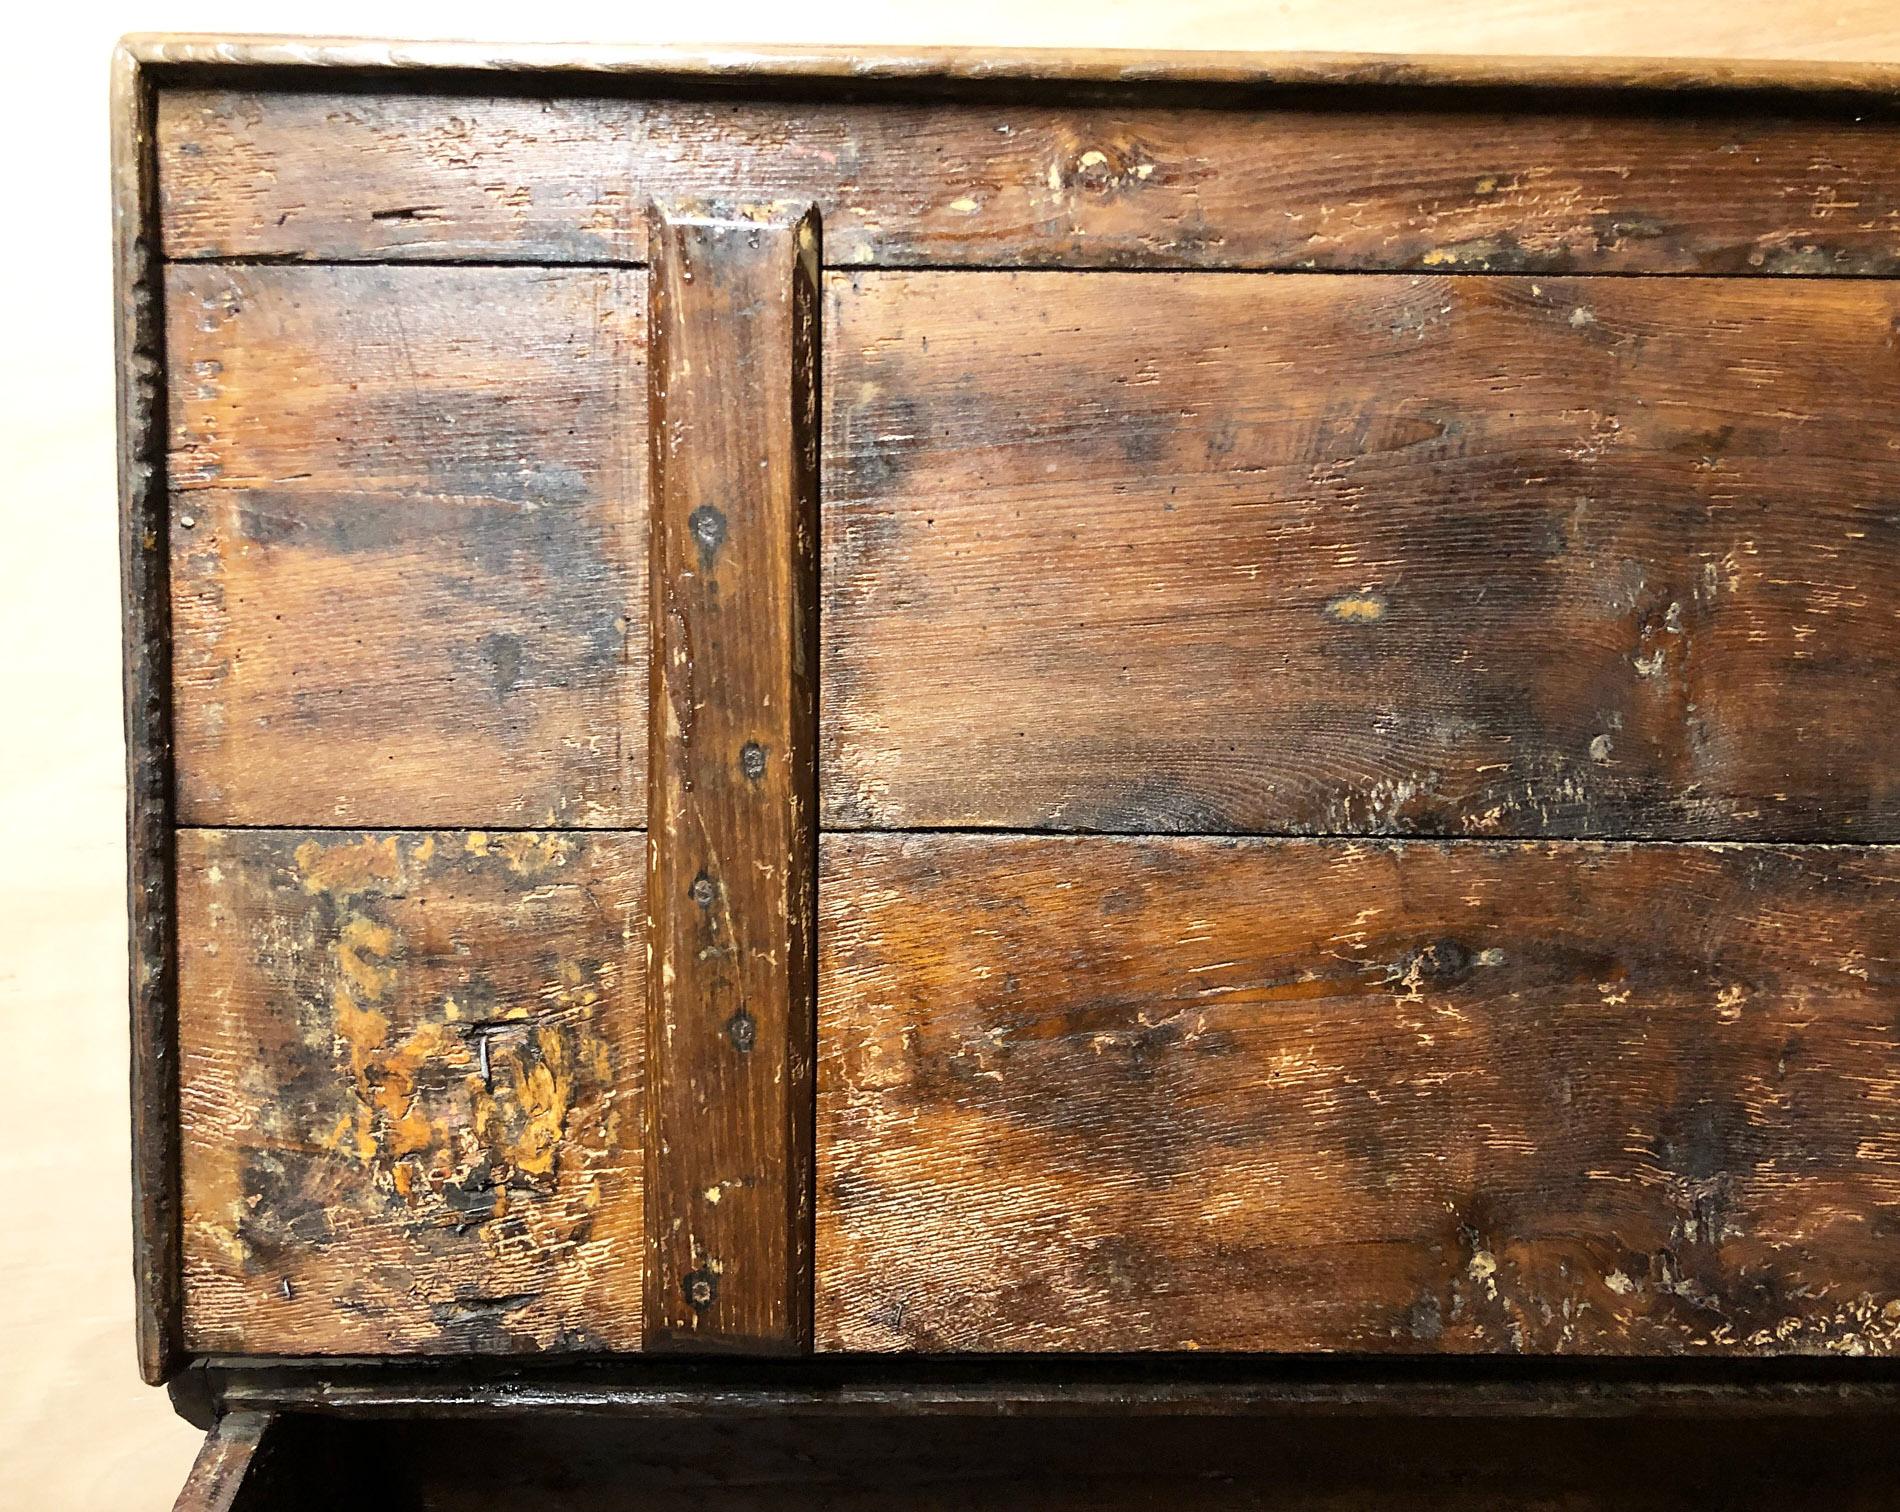 Sideboard to make and contain bread and flour. 
Antique original, from 1800, Italian, in solid chestnut.
Rarity, it is very heavy, has the upper door that can be opened and part of the front.
Coming from the house of the custodian of the Carrara